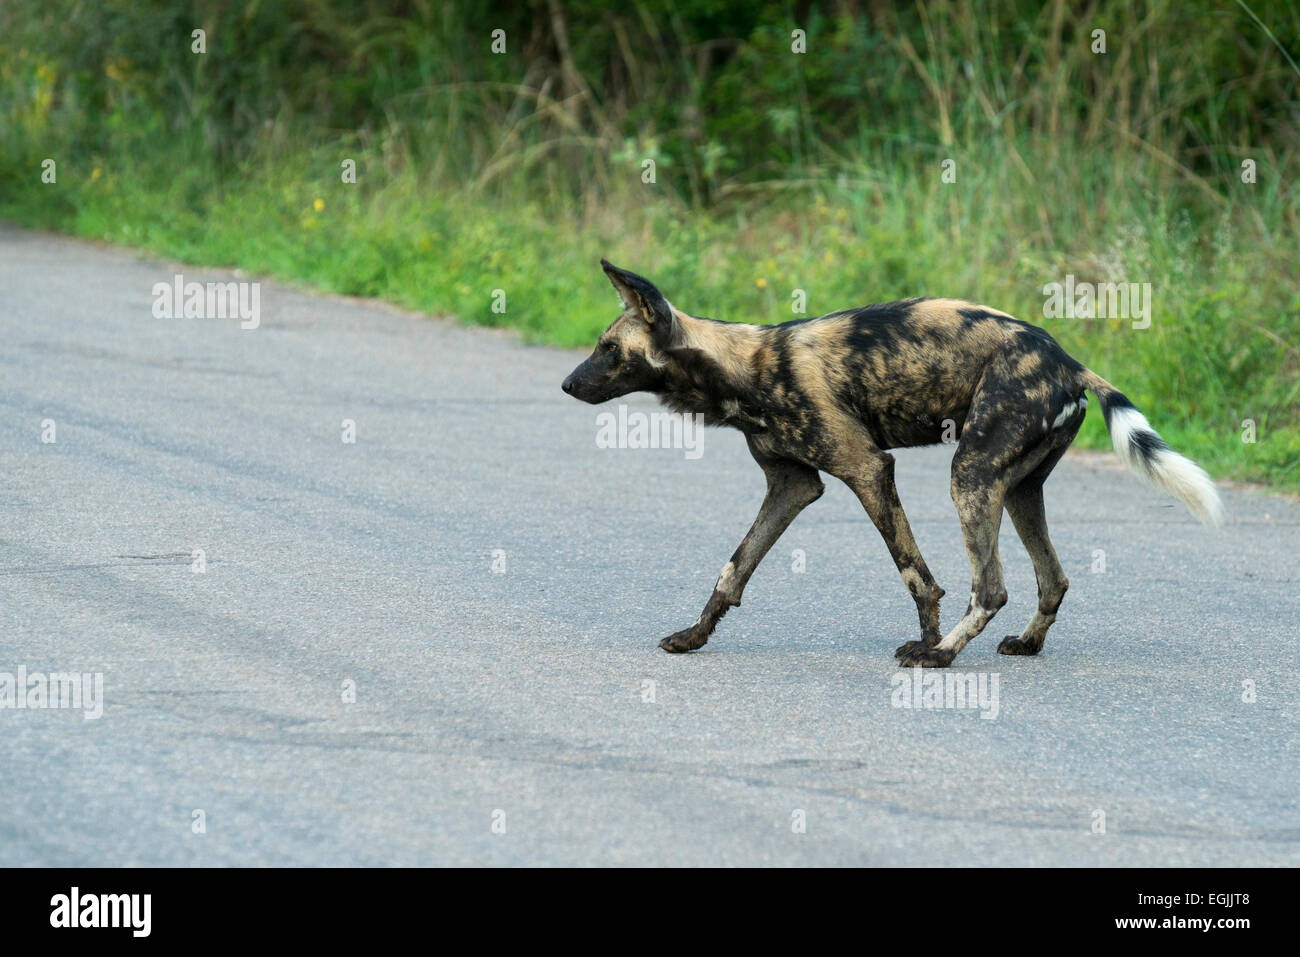 African wild dog (Lycaon pictus), Kruger National Park, South Africa Stock Photo